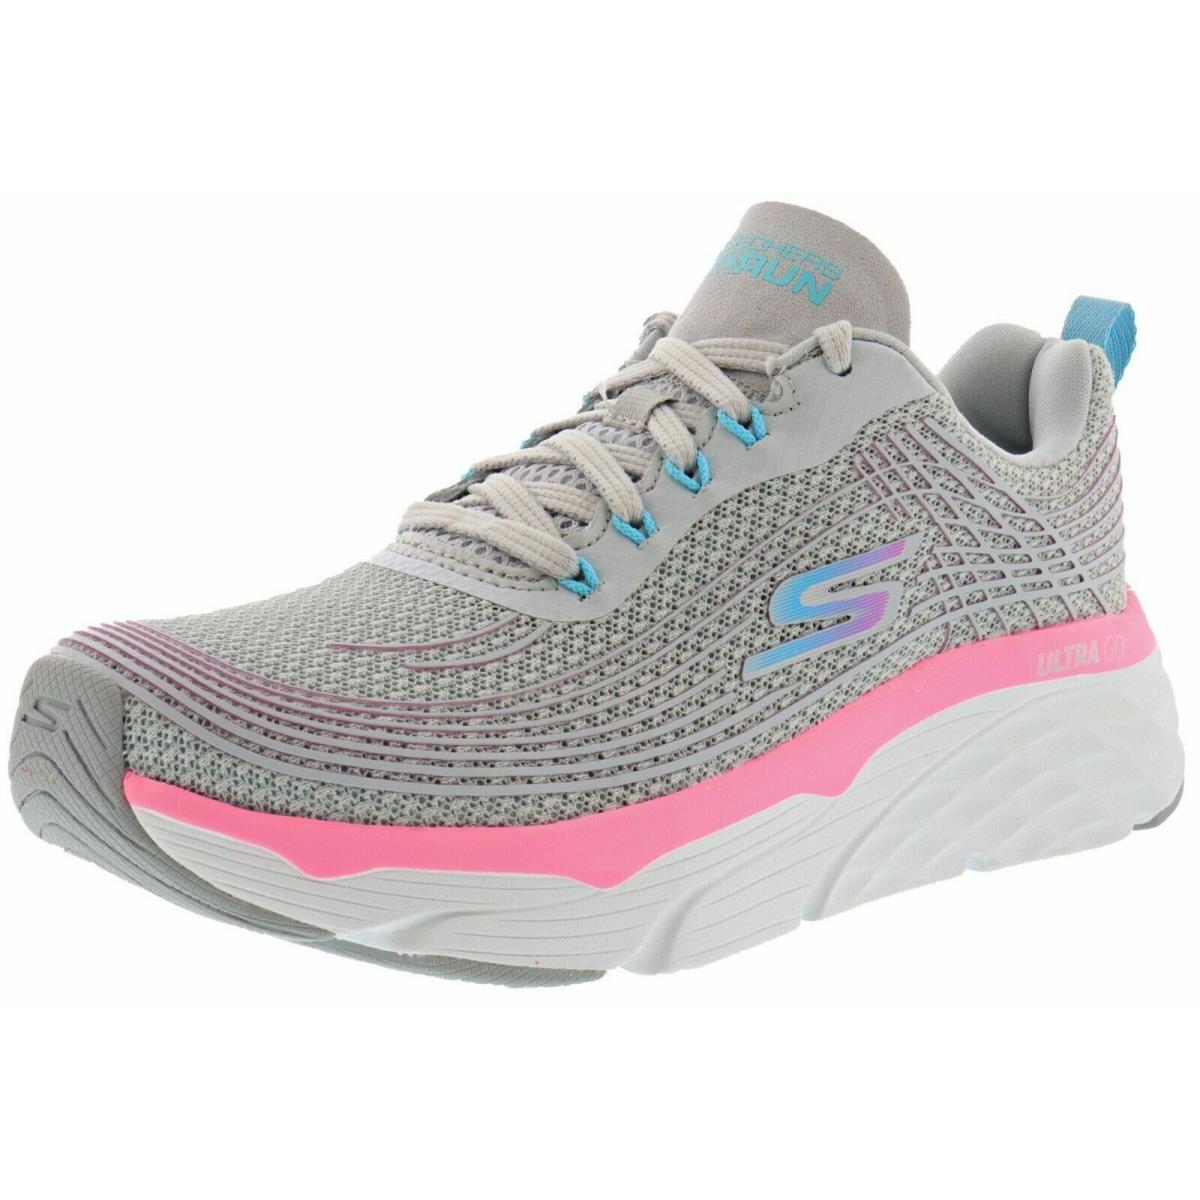 Gray Pink Skechers Women`s Max Cushoning Elite Gypk Lace Up Running Shoes 17693